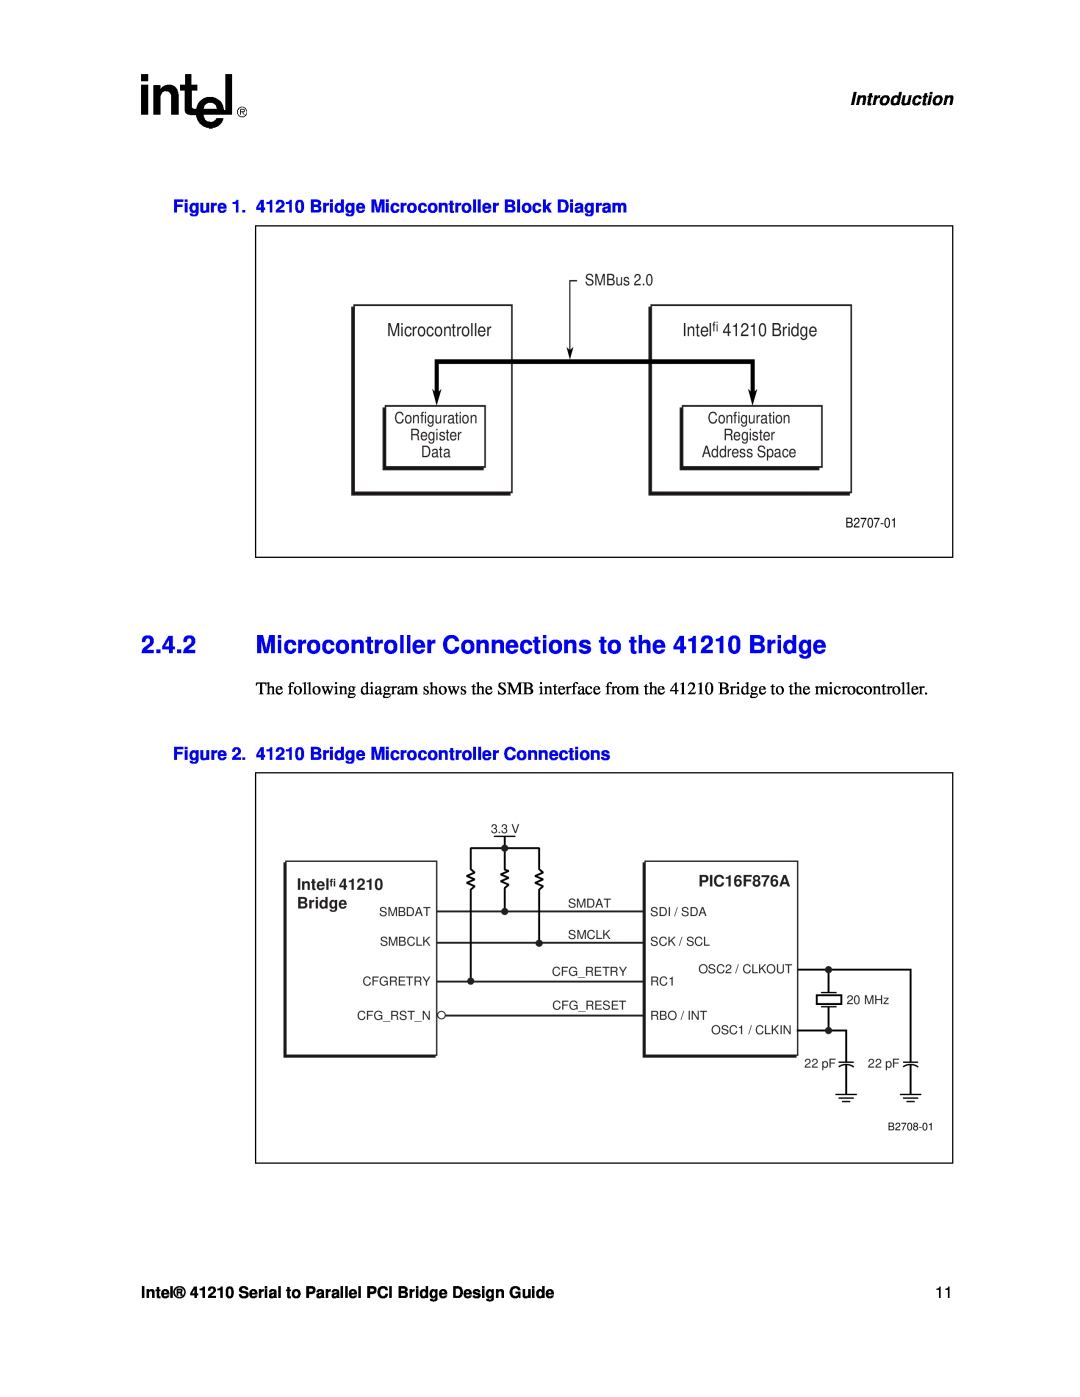 Intel Microcontroller Connections to the 41210 Bridge, 41210 Bridge Microcontroller Block Diagram, Introduction, SMBus 